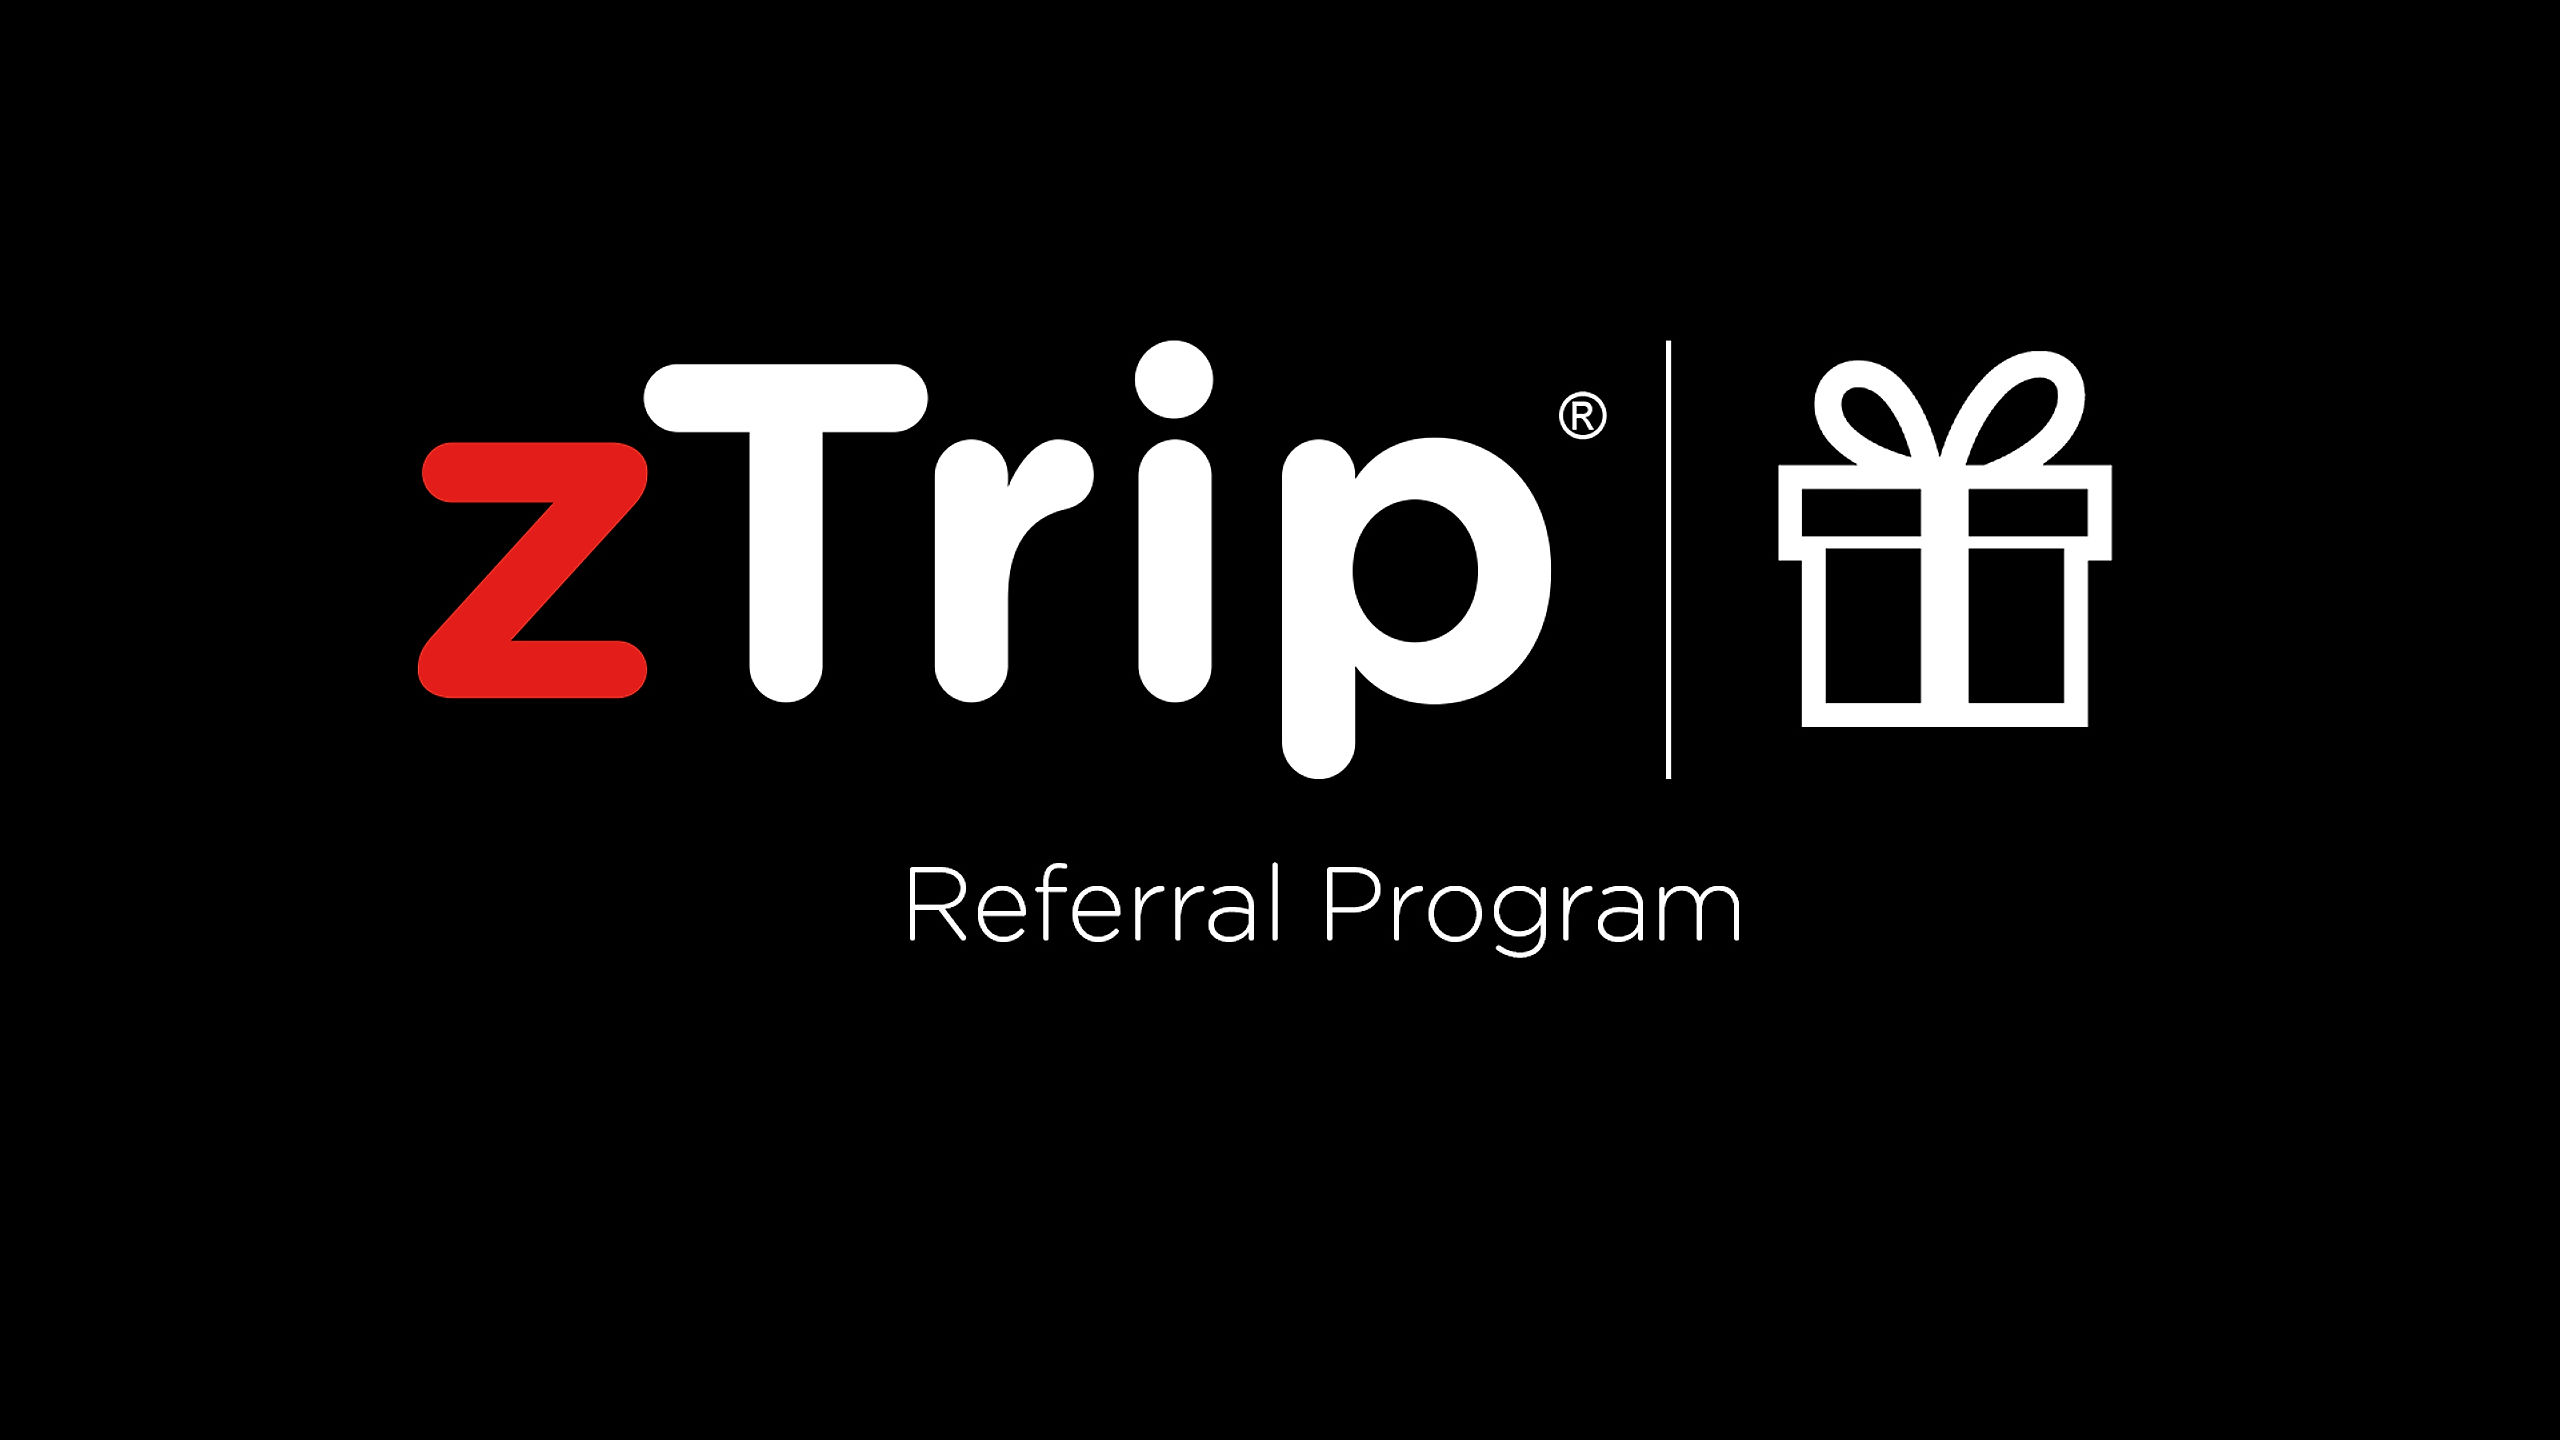 How to use the zTrip referral program